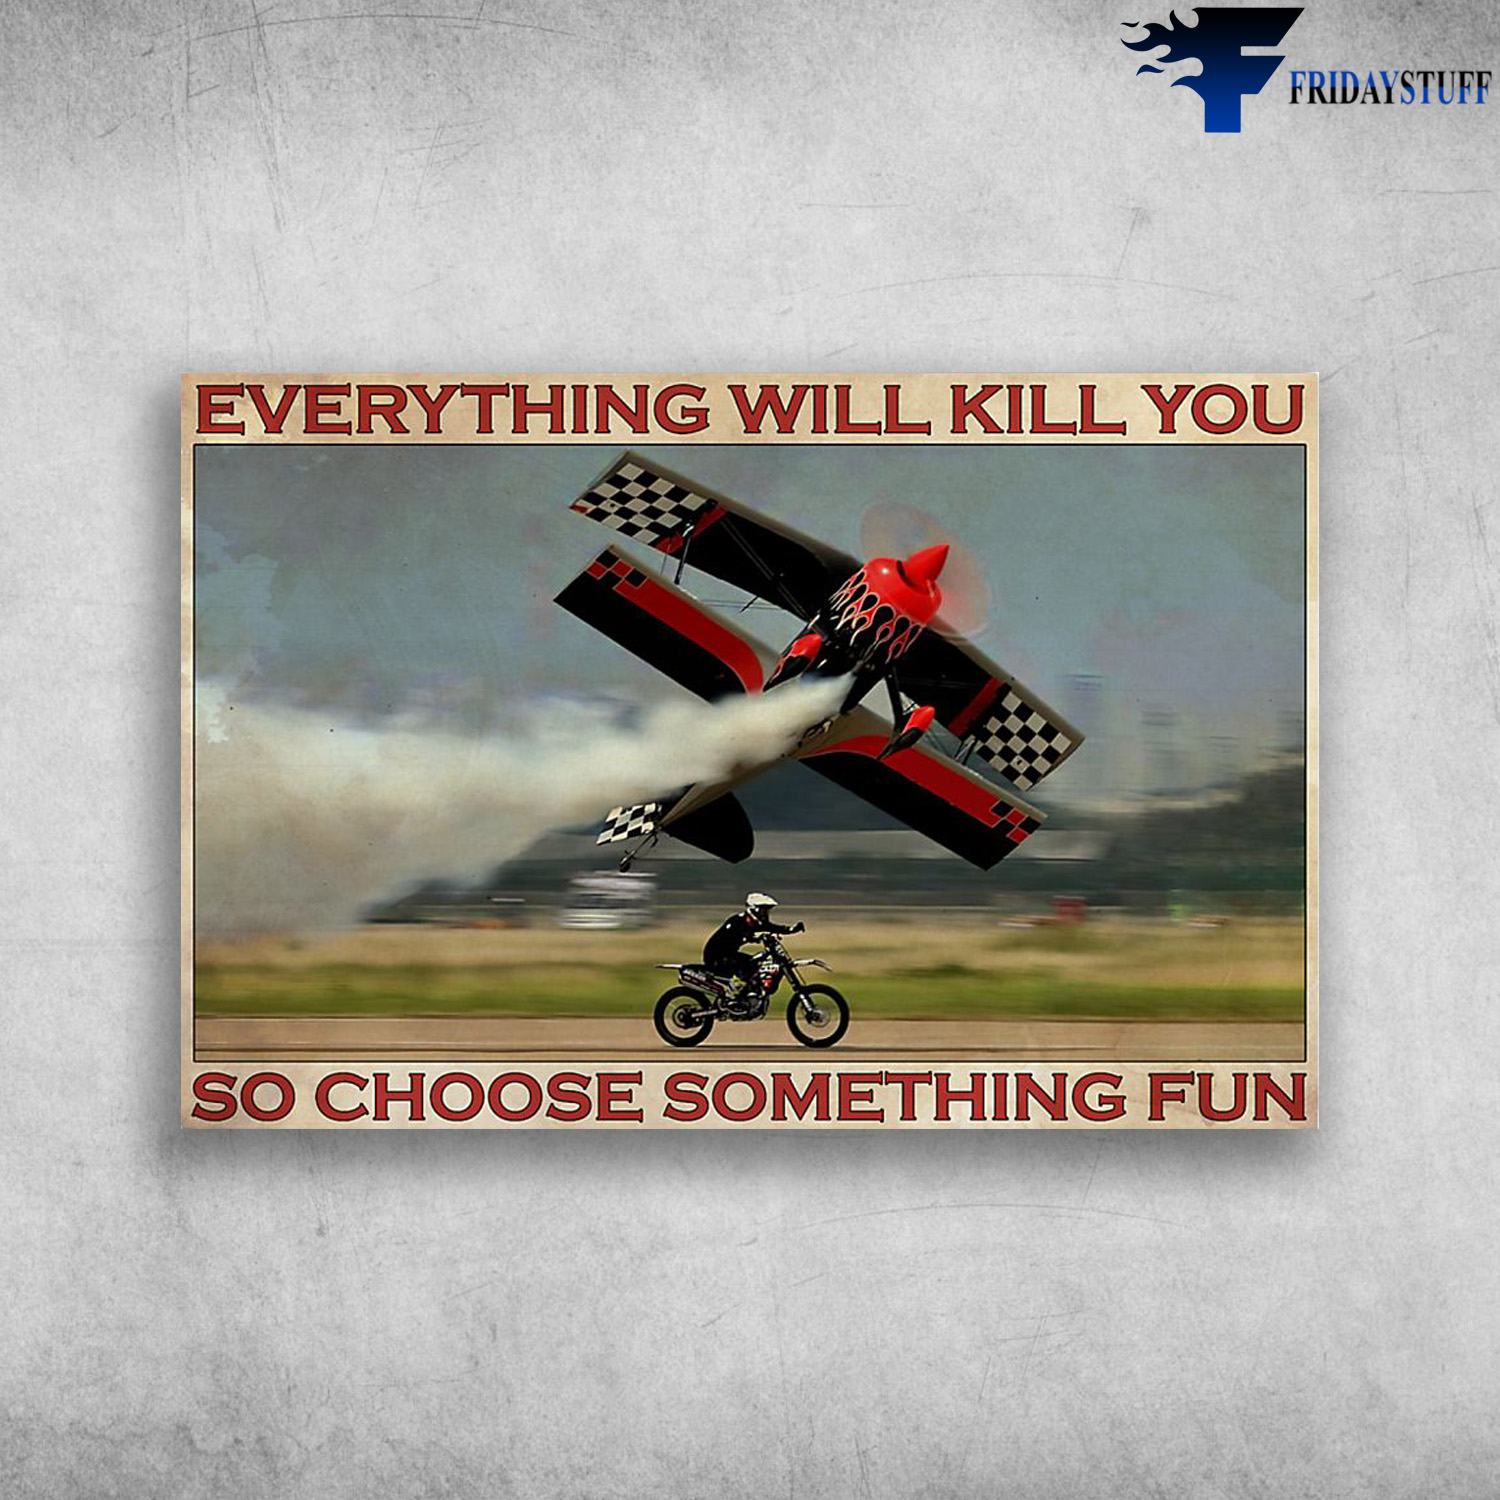 Motorcycle Racer And Broken Plane - Everything Will Kill You So Choose Something Fun